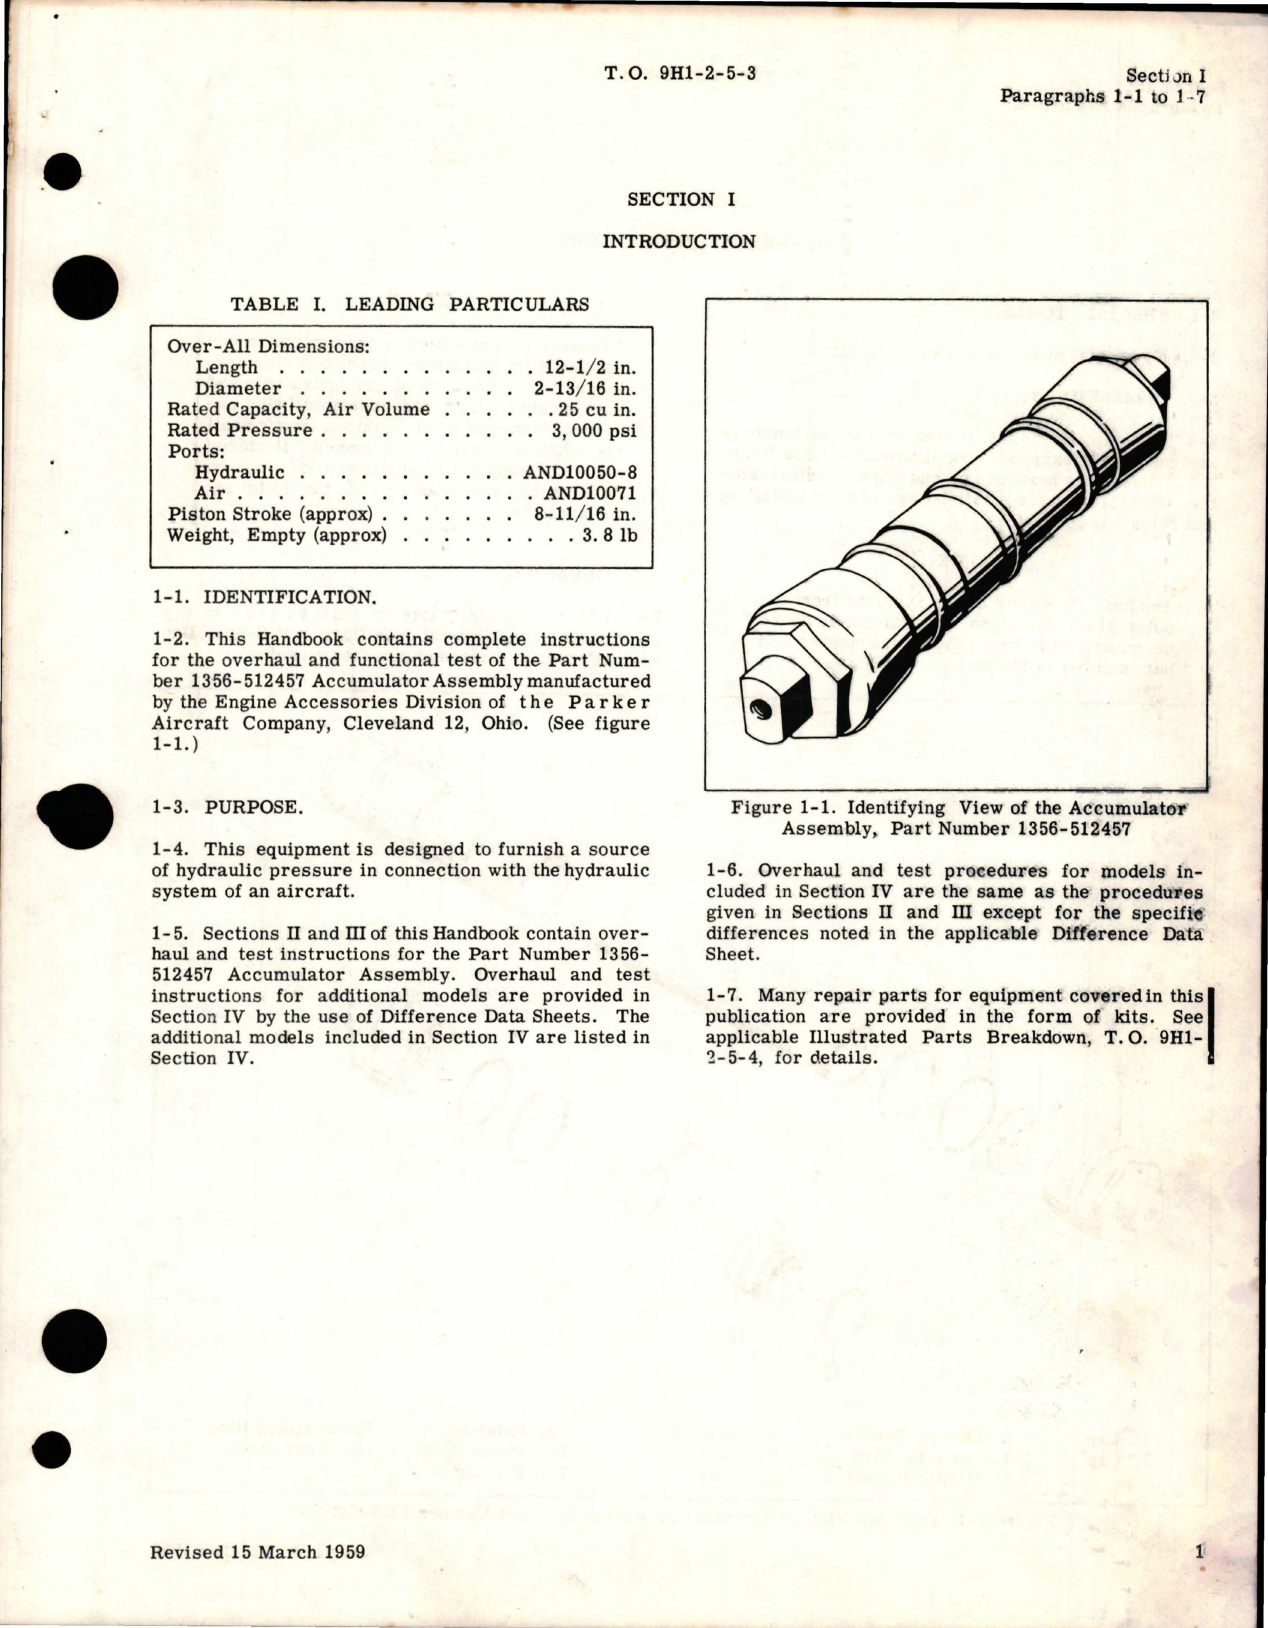 Sample page 5 from AirCorps Library document: Overhaul Instructions for Accumulator Assembly